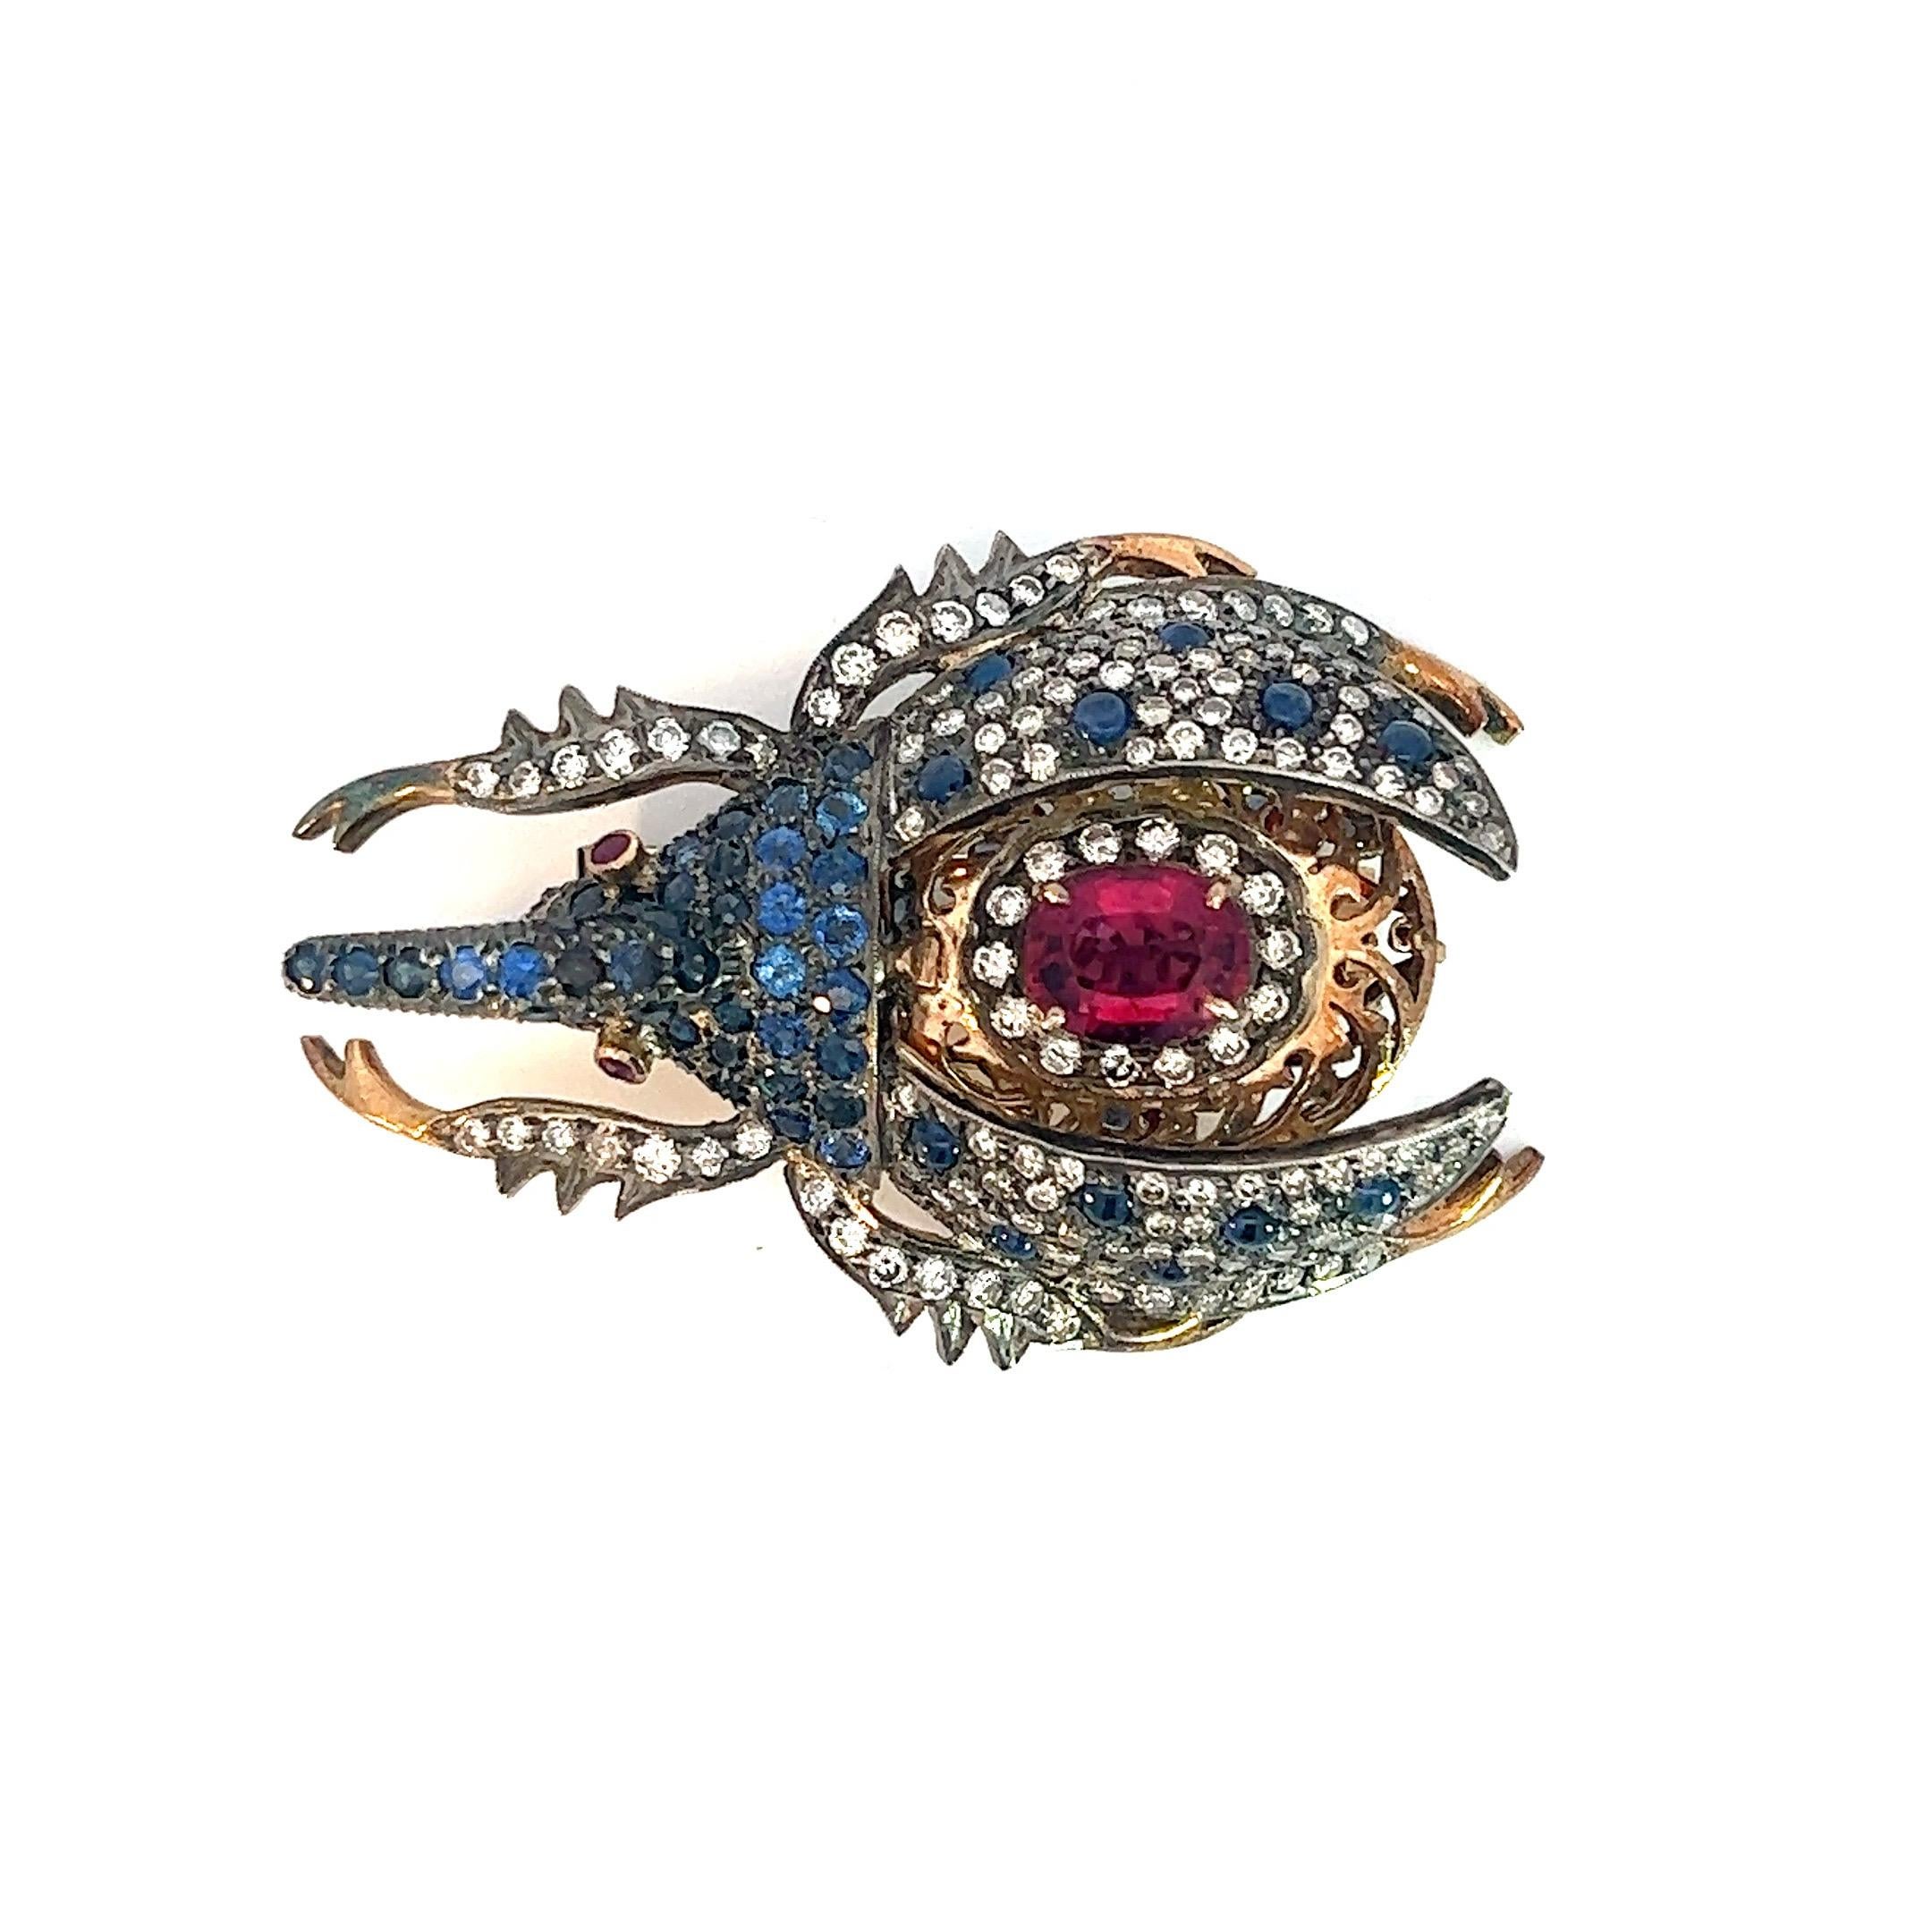 3 Carat Diamond, Sapphire Edwardian Style Beetle Pin with 3.5 Carat Spinel 18K  In New Condition For Sale In New York, NY